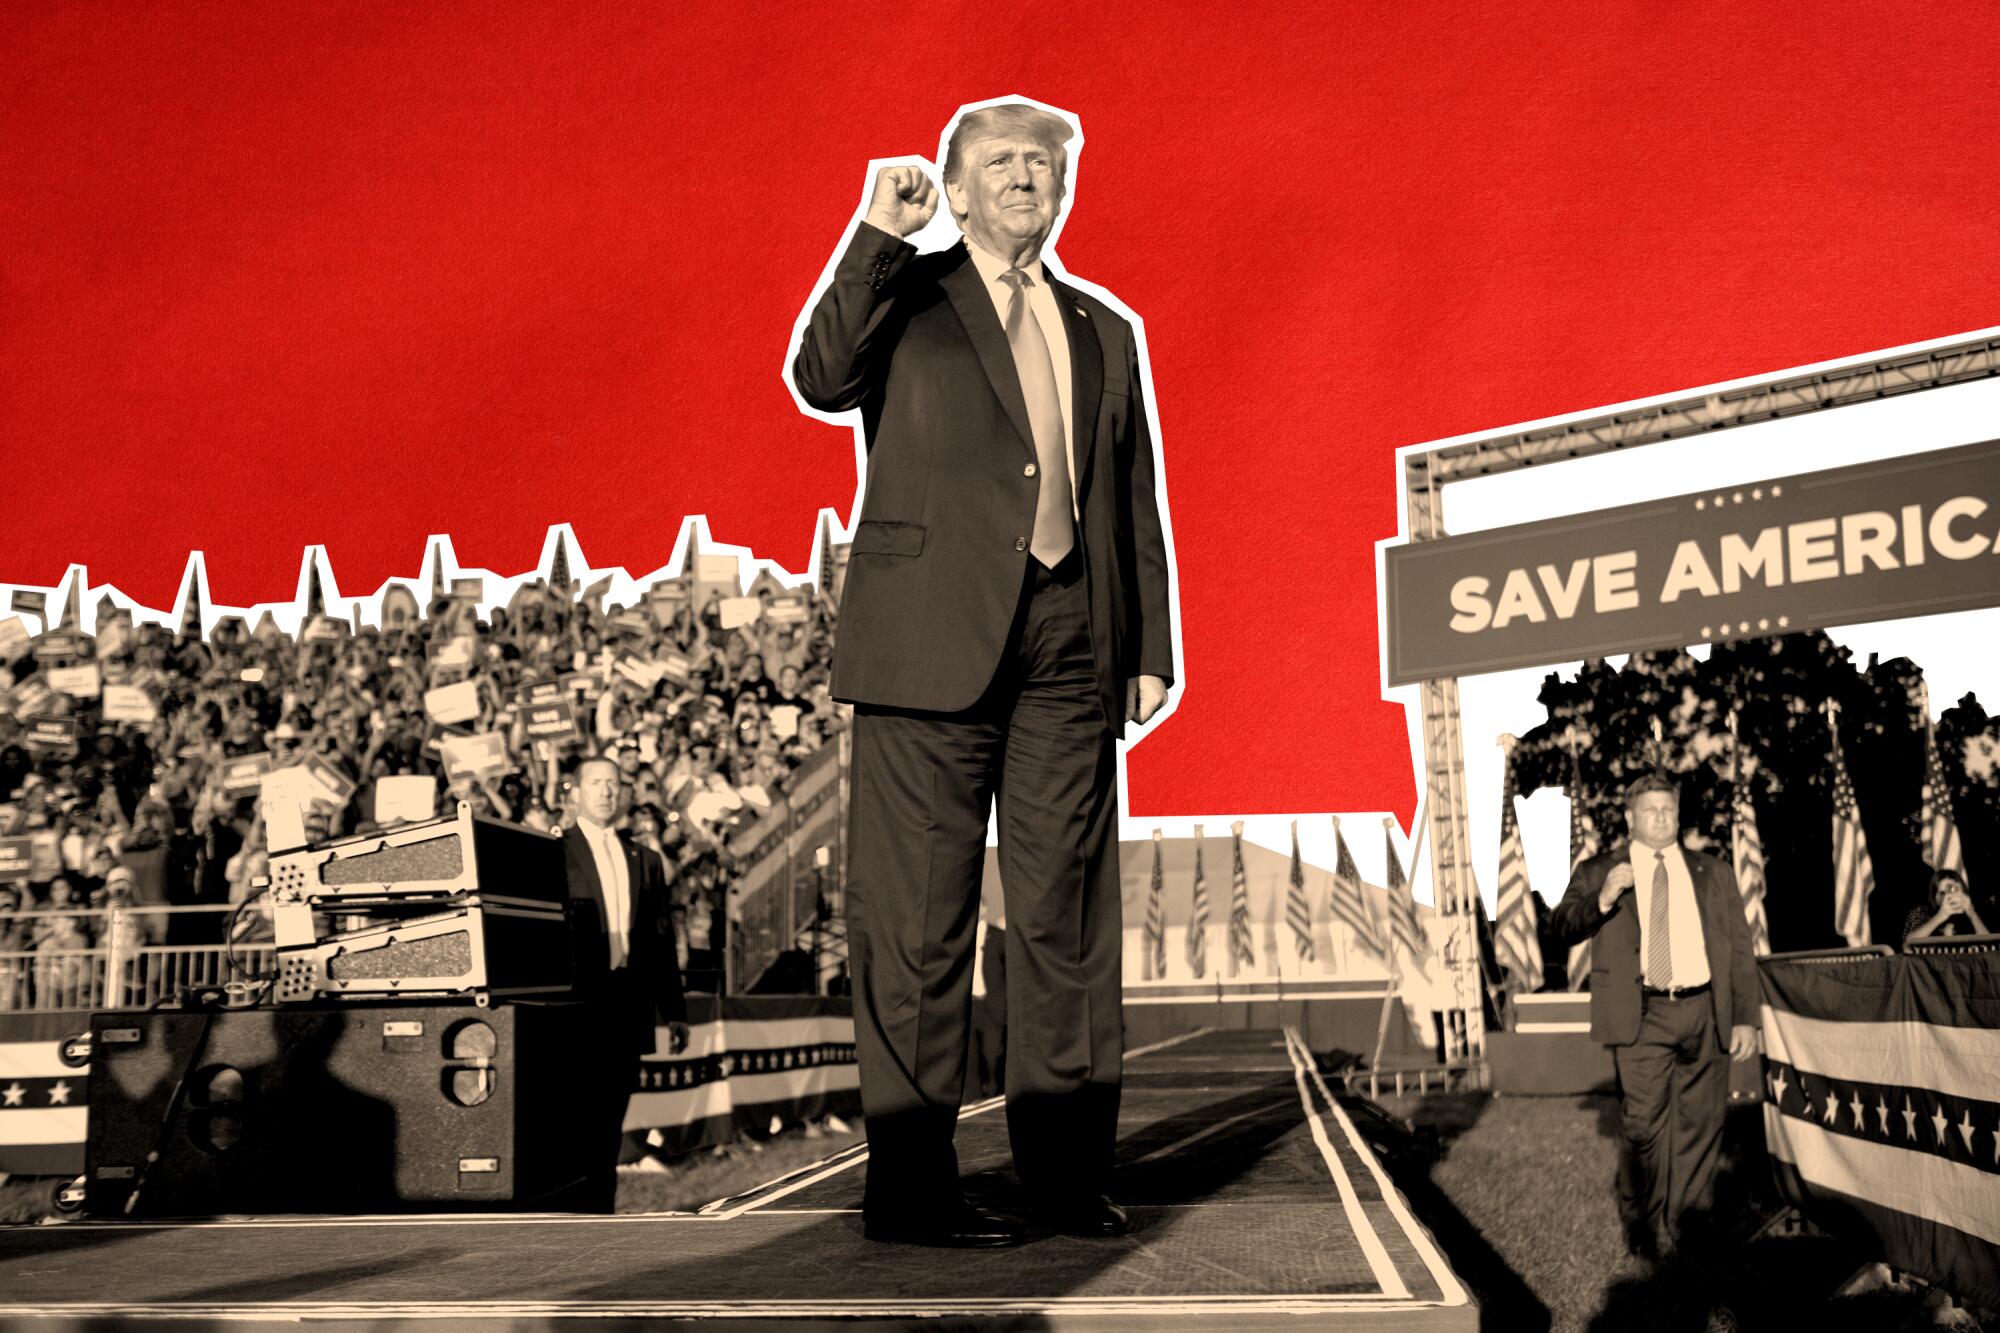 Photoillustration of Donald Trump raising his fist at a rally with a red background